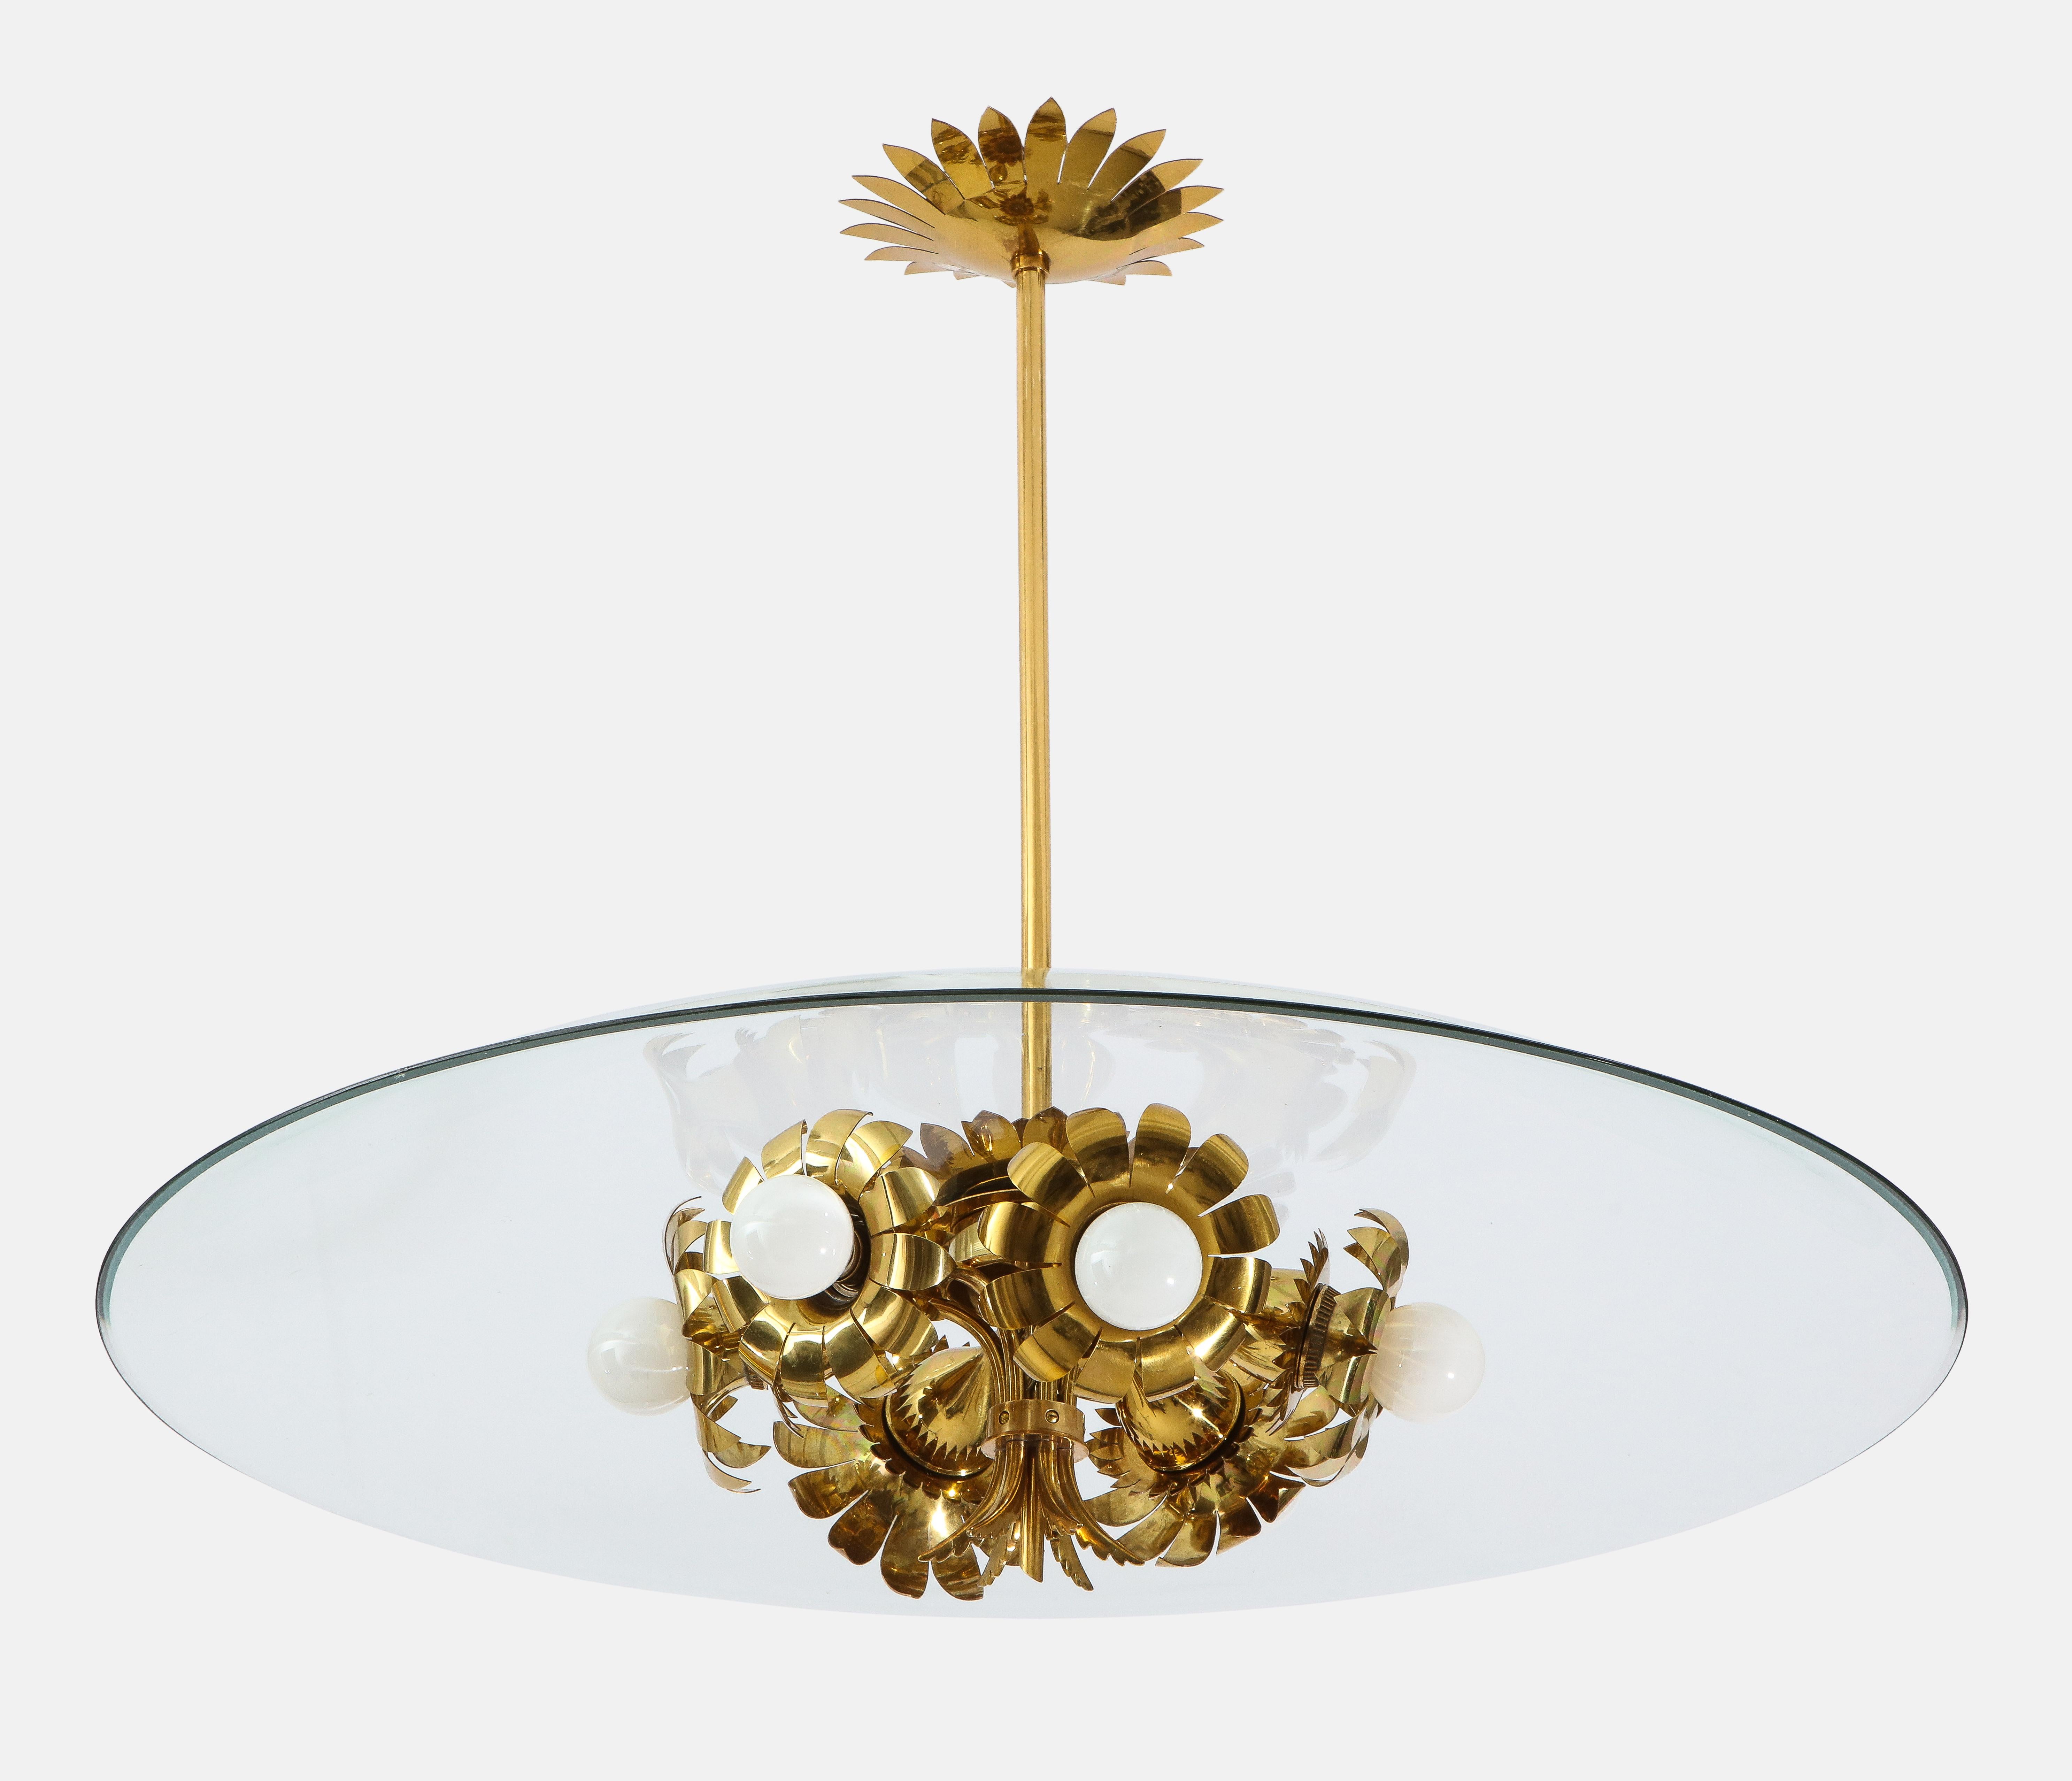 Pietro Chiesa for Fontana Arte rare and important chandelier with lacquered brass structure including six flower shaped socket holders and intricate floral motif decorations, large beveled clear glass disc, and original canopy, Italy, circa 1940.